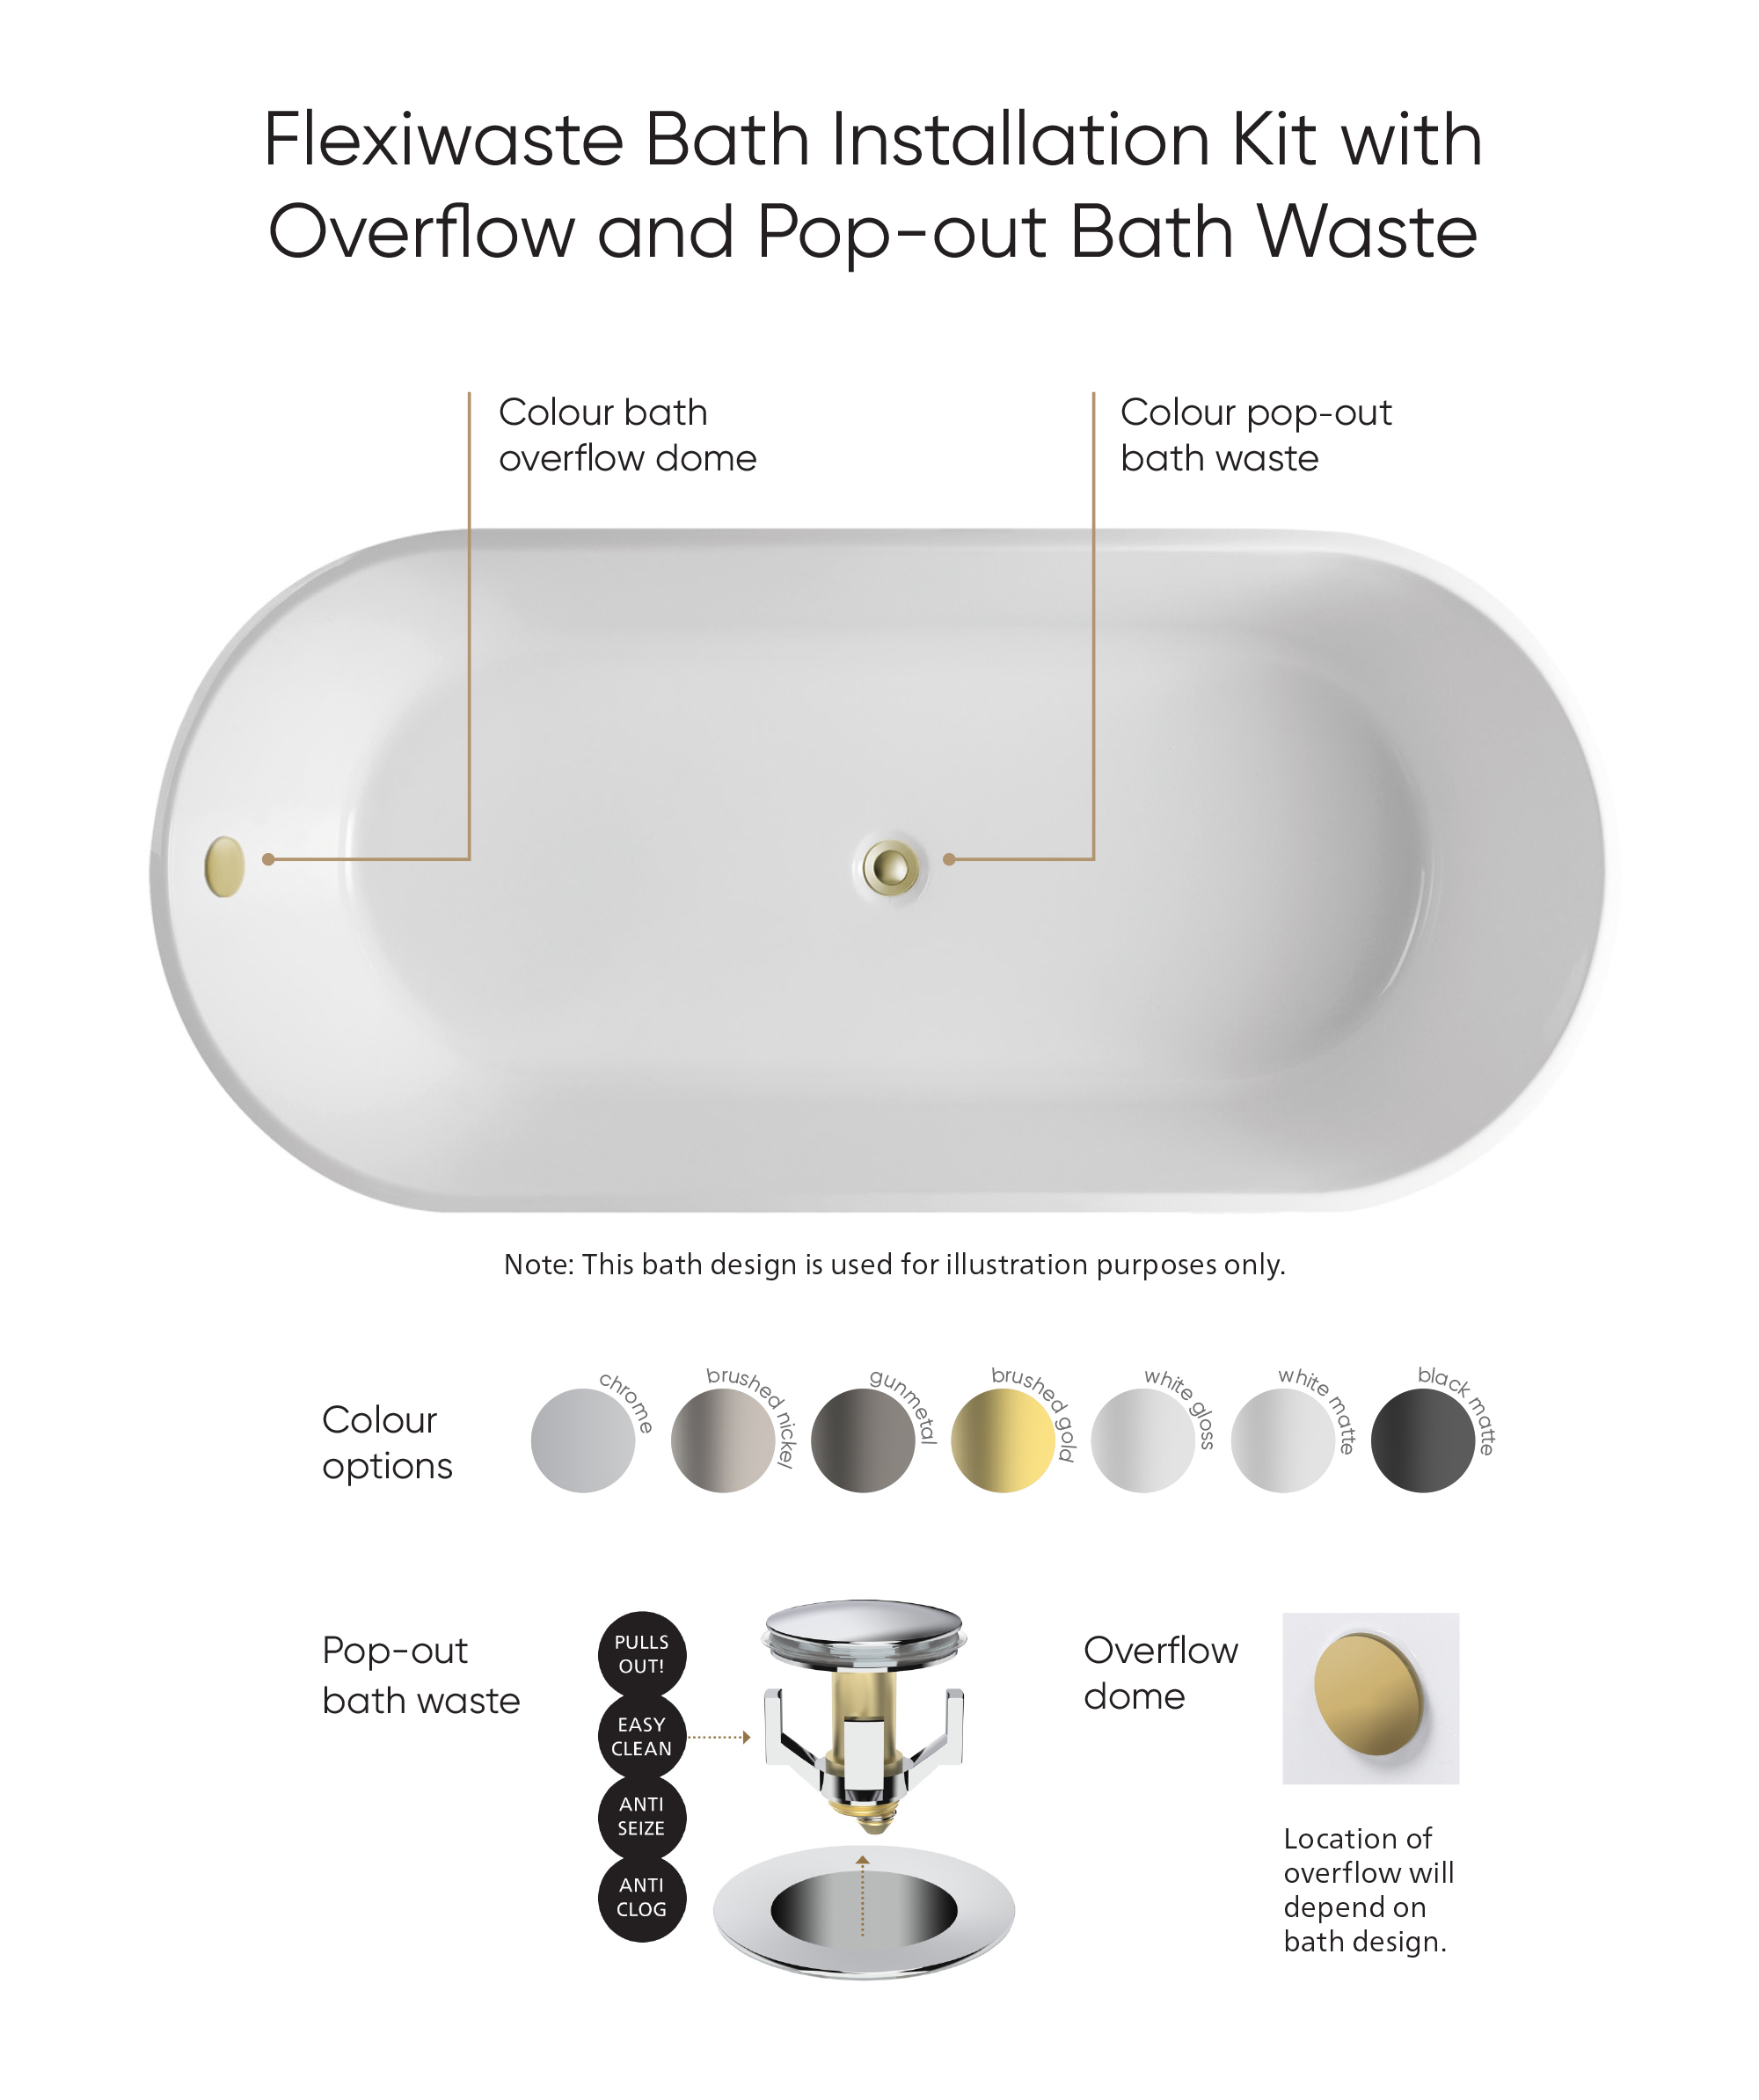 Syros 103 Select inset bath - with Overflow Premium and Pop-out Waste - 2 sizes